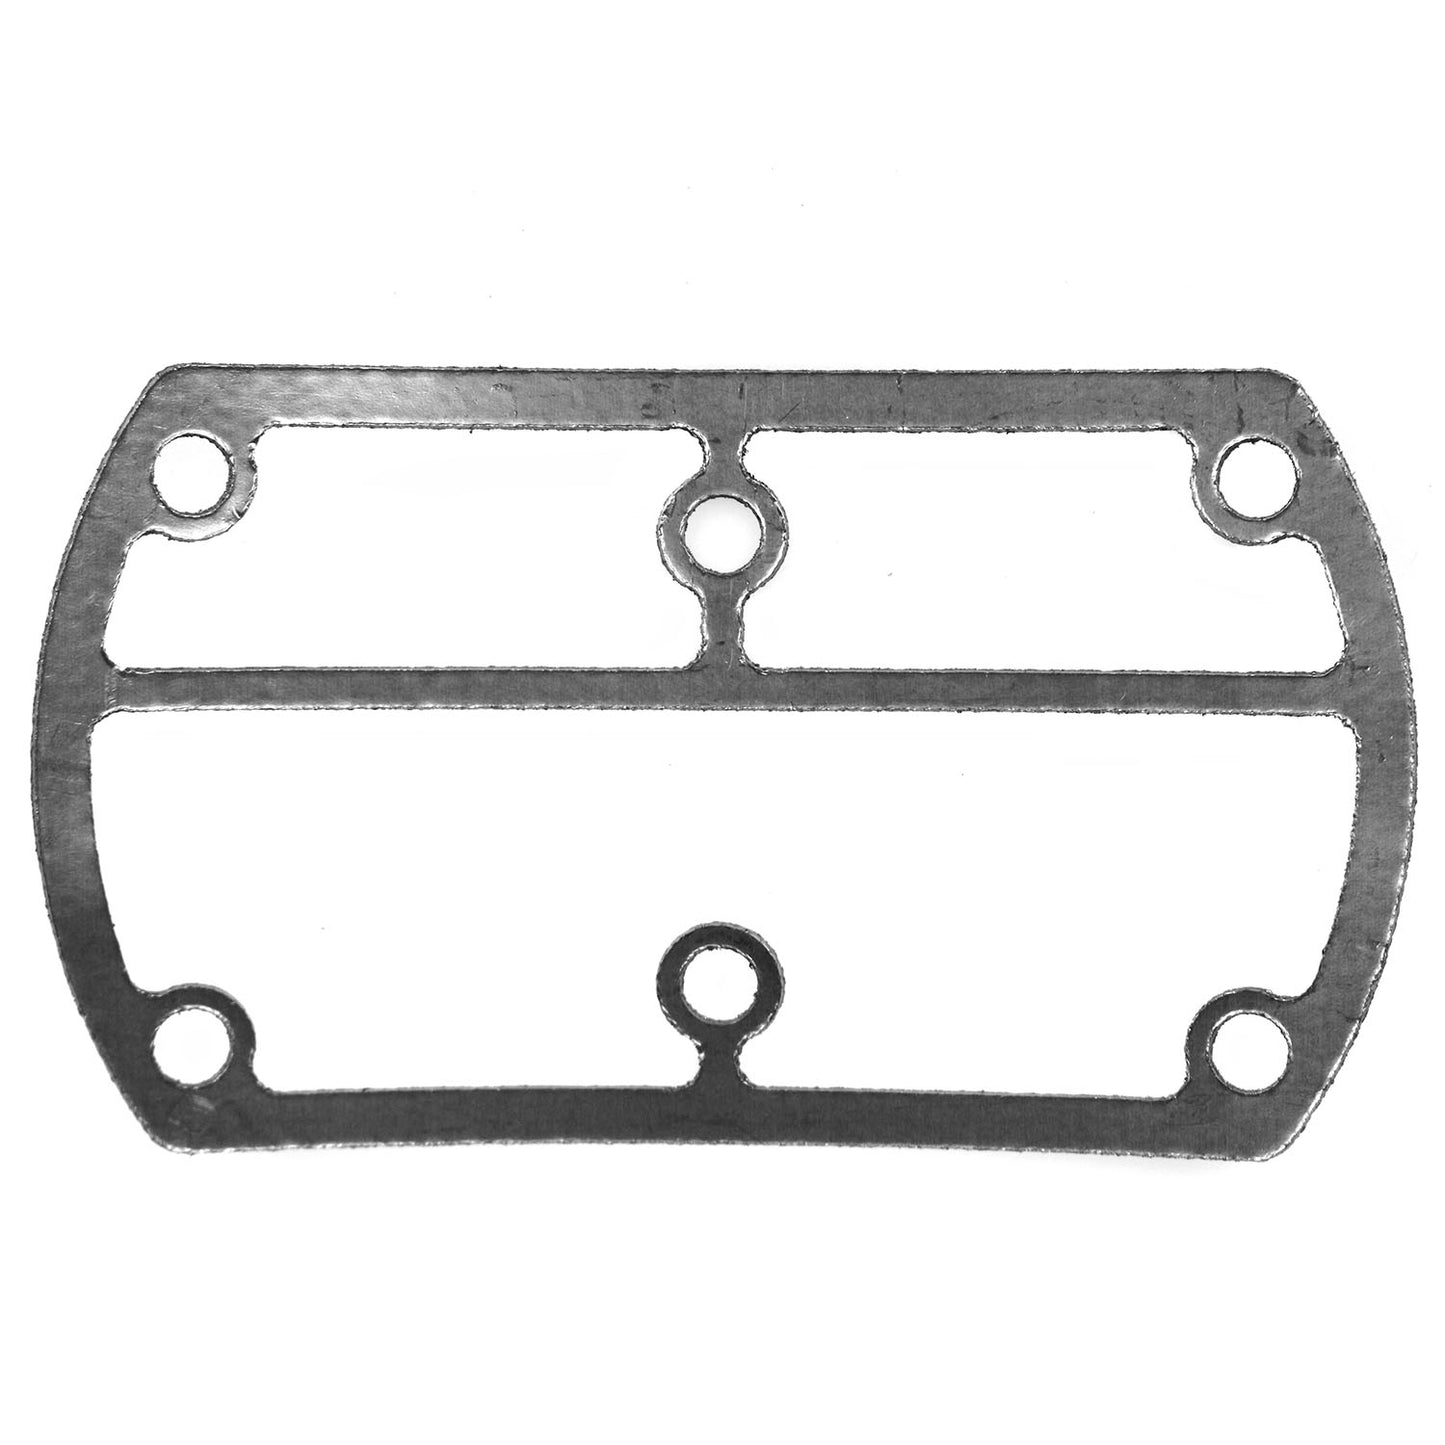 Ingersoll Rand SS3 Head Gasket Replacement for 54571609 Gasket